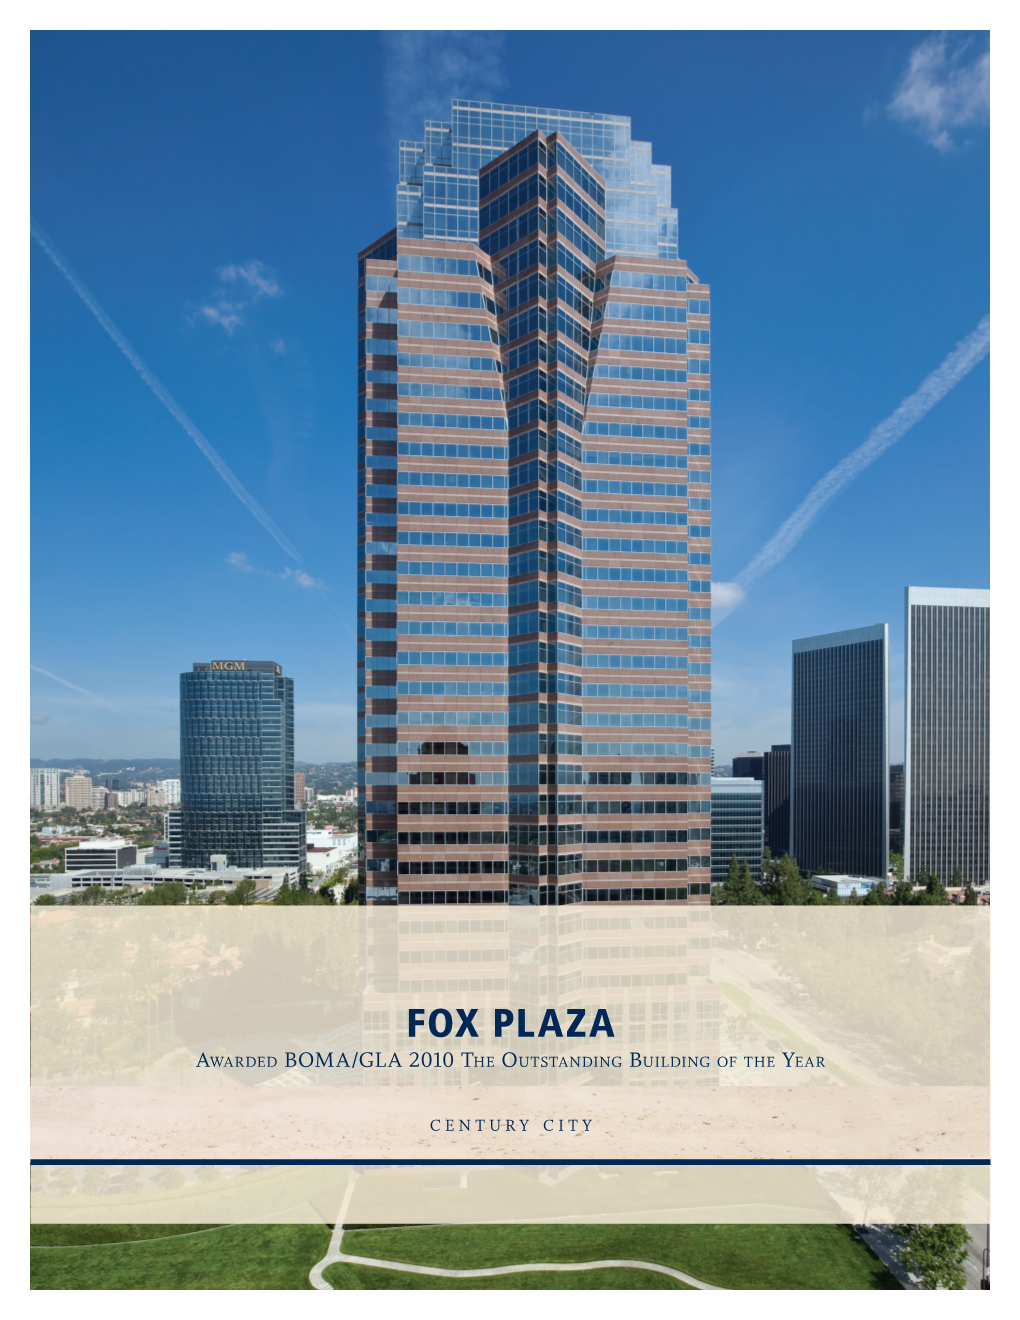 FOX PLAZA Awarded BOMA/GLA 2010 the Outstanding Building of the Year